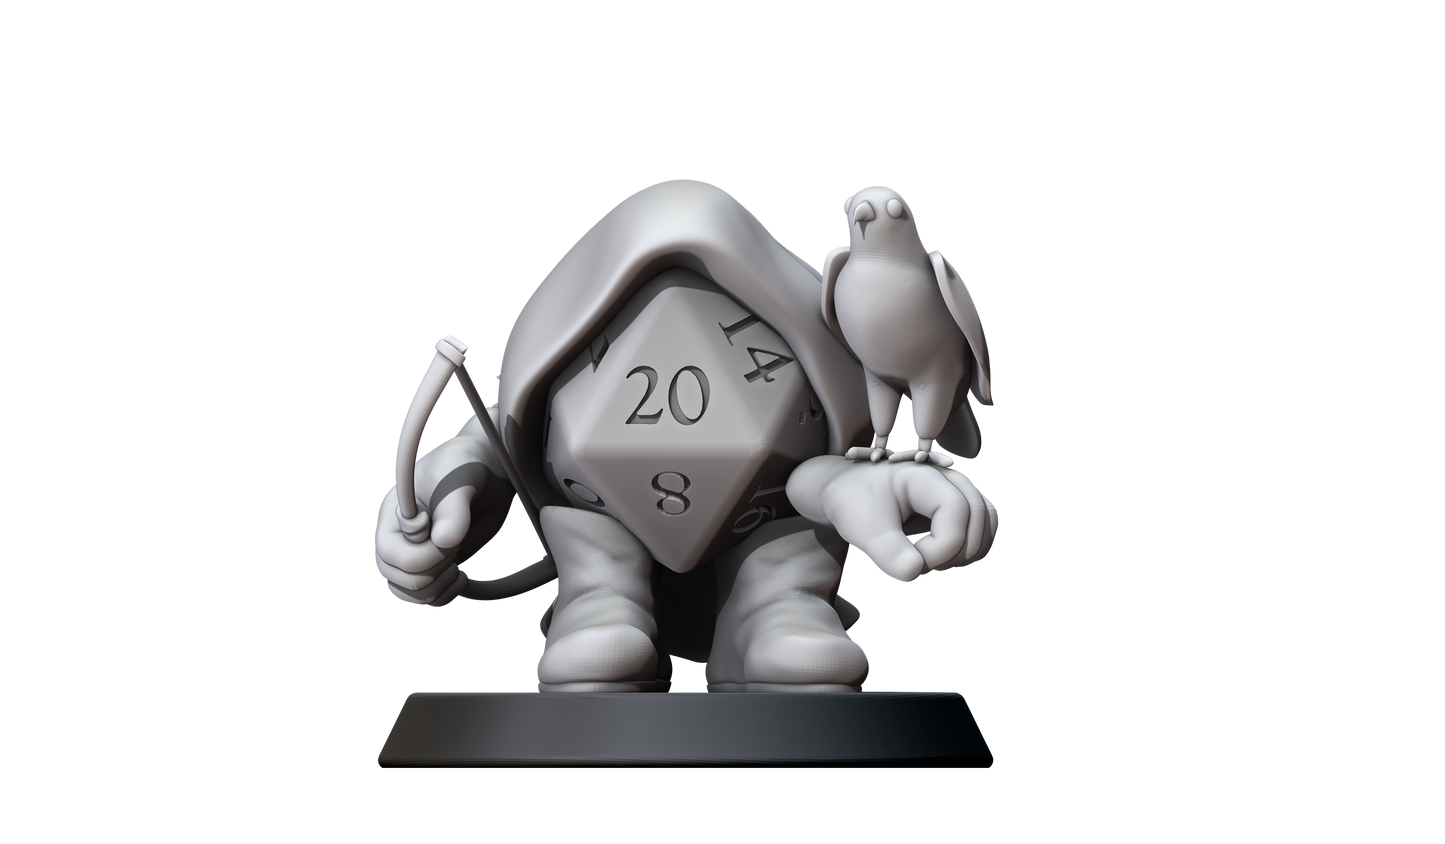 D20 Ranger Construct Hero (Small) by Minitaurus for Tabletop Games, Dioramas and Statues, Available in 15mm, 28mm, 32mm, 32mm heroic, 54mm and 75mm Statue Scale